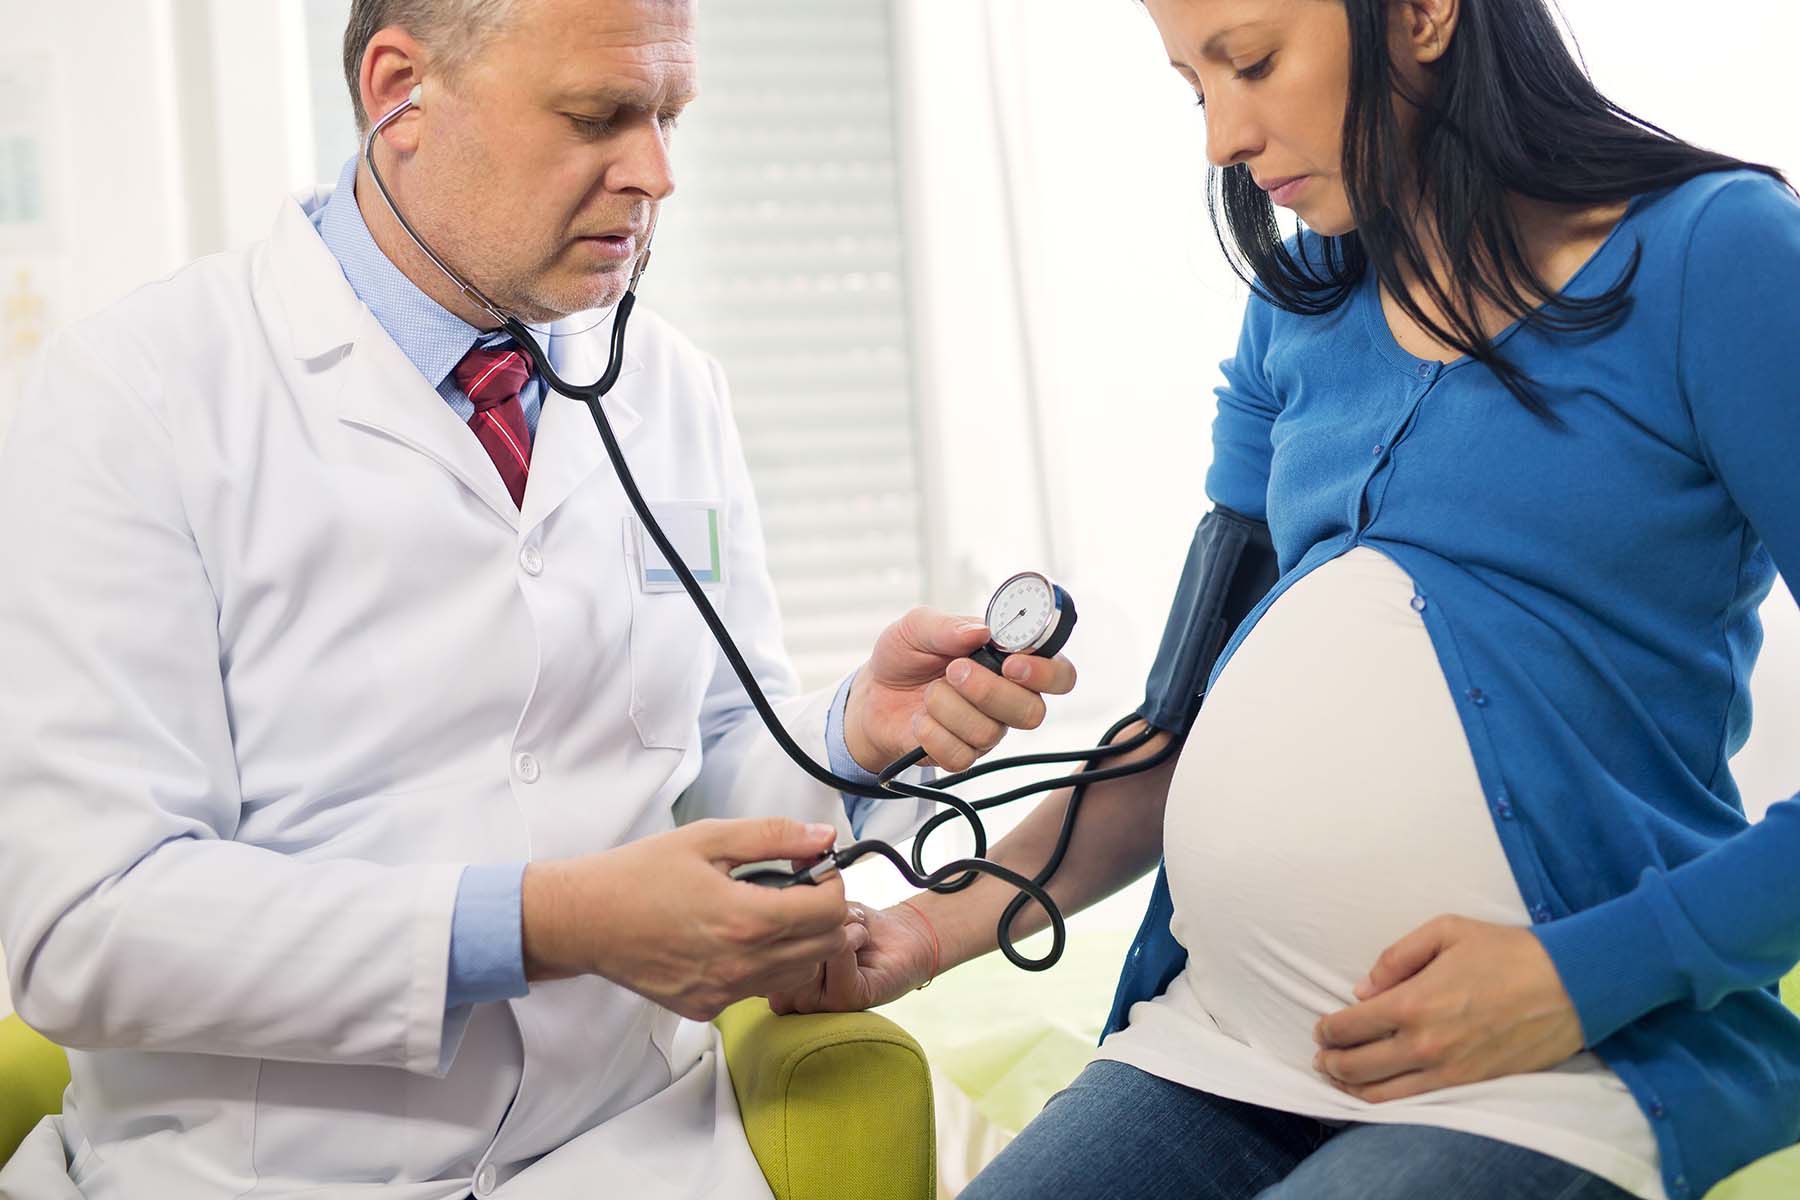 Pregnant woman gets her blood pressure checked at doctor appointment to check for preclampsia.